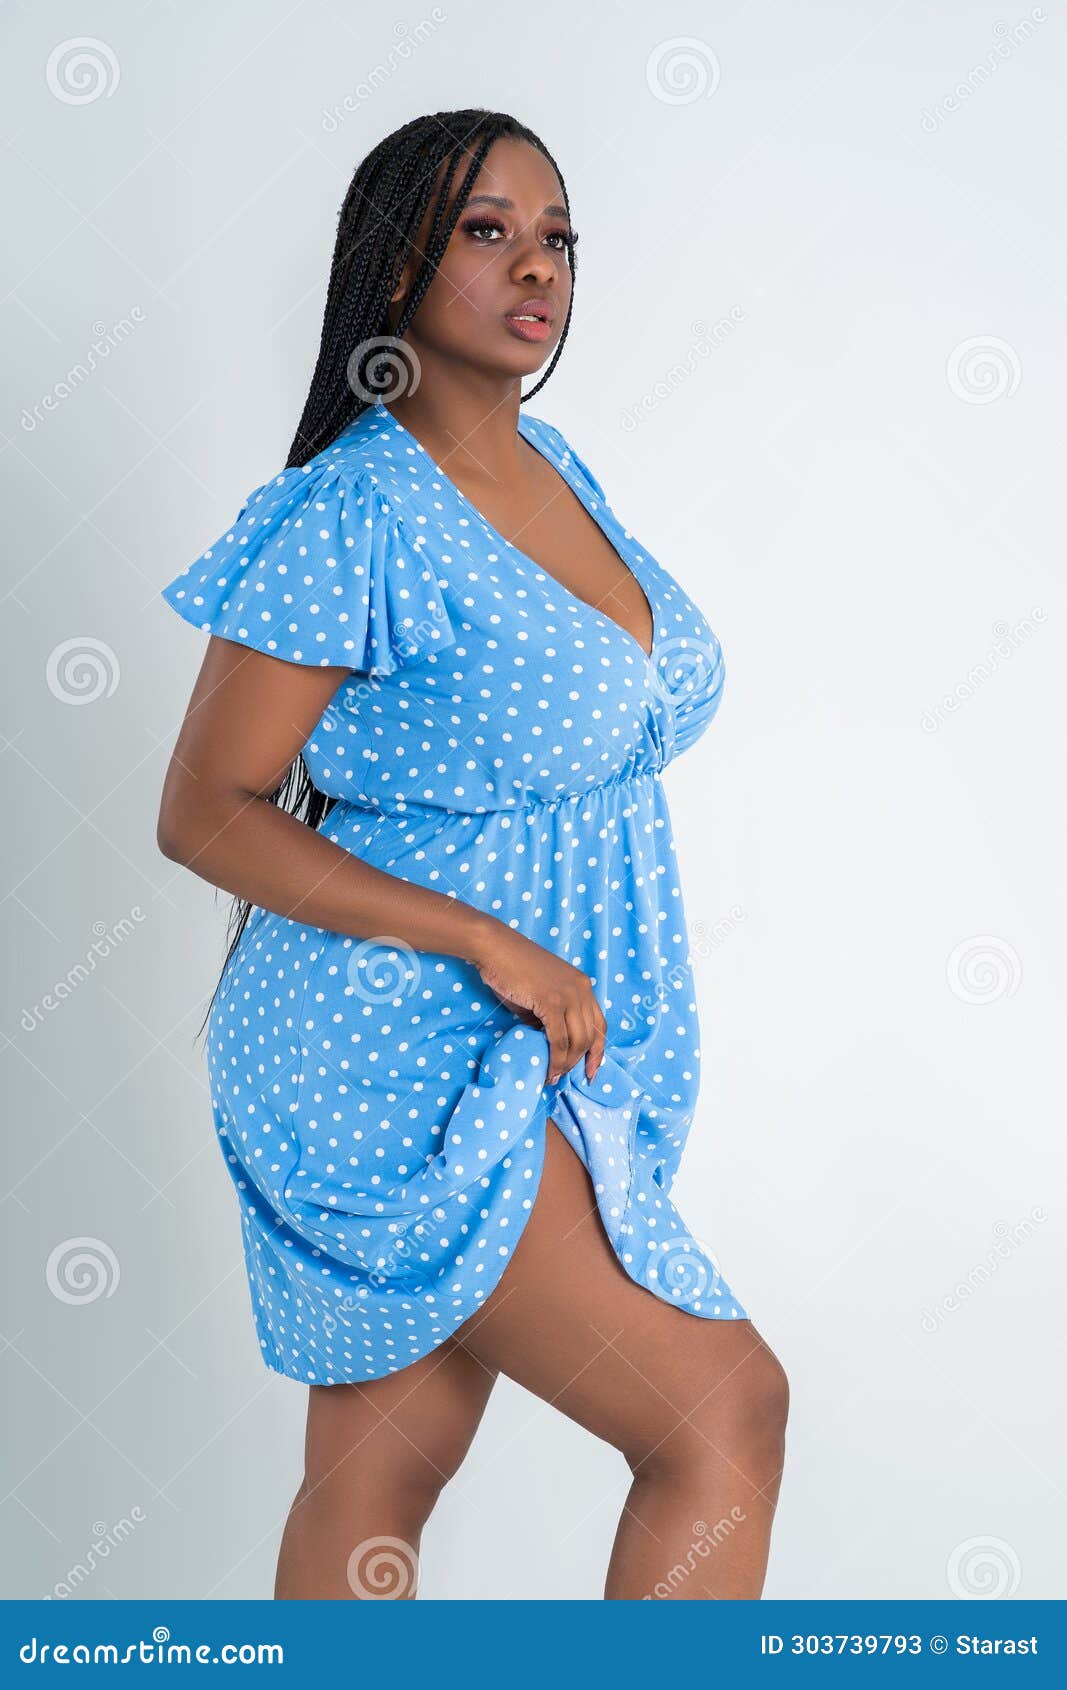 https://thumbs.dreamstime.com/z/plus-size-female-model-posing-blue-dress-white-studio-background-young-african-woman-curvy-figure-pigtailed-303739793.jpg